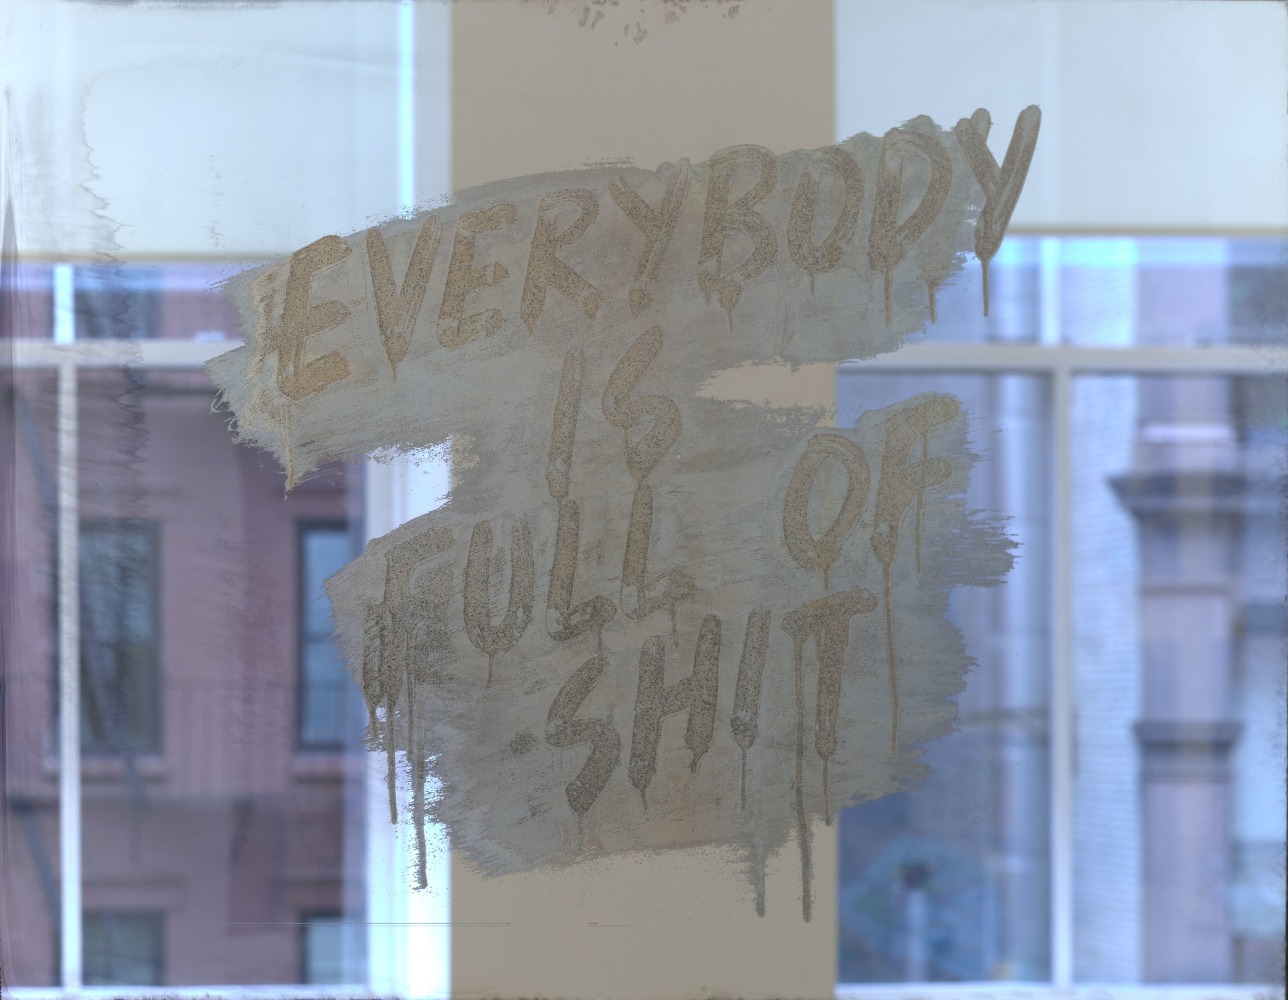 Everybody Is Full Of Shit,&amp;nbsp;2018
Etched and silvered glass
25 x 35 x 1 1/2 inches
Edition of 12